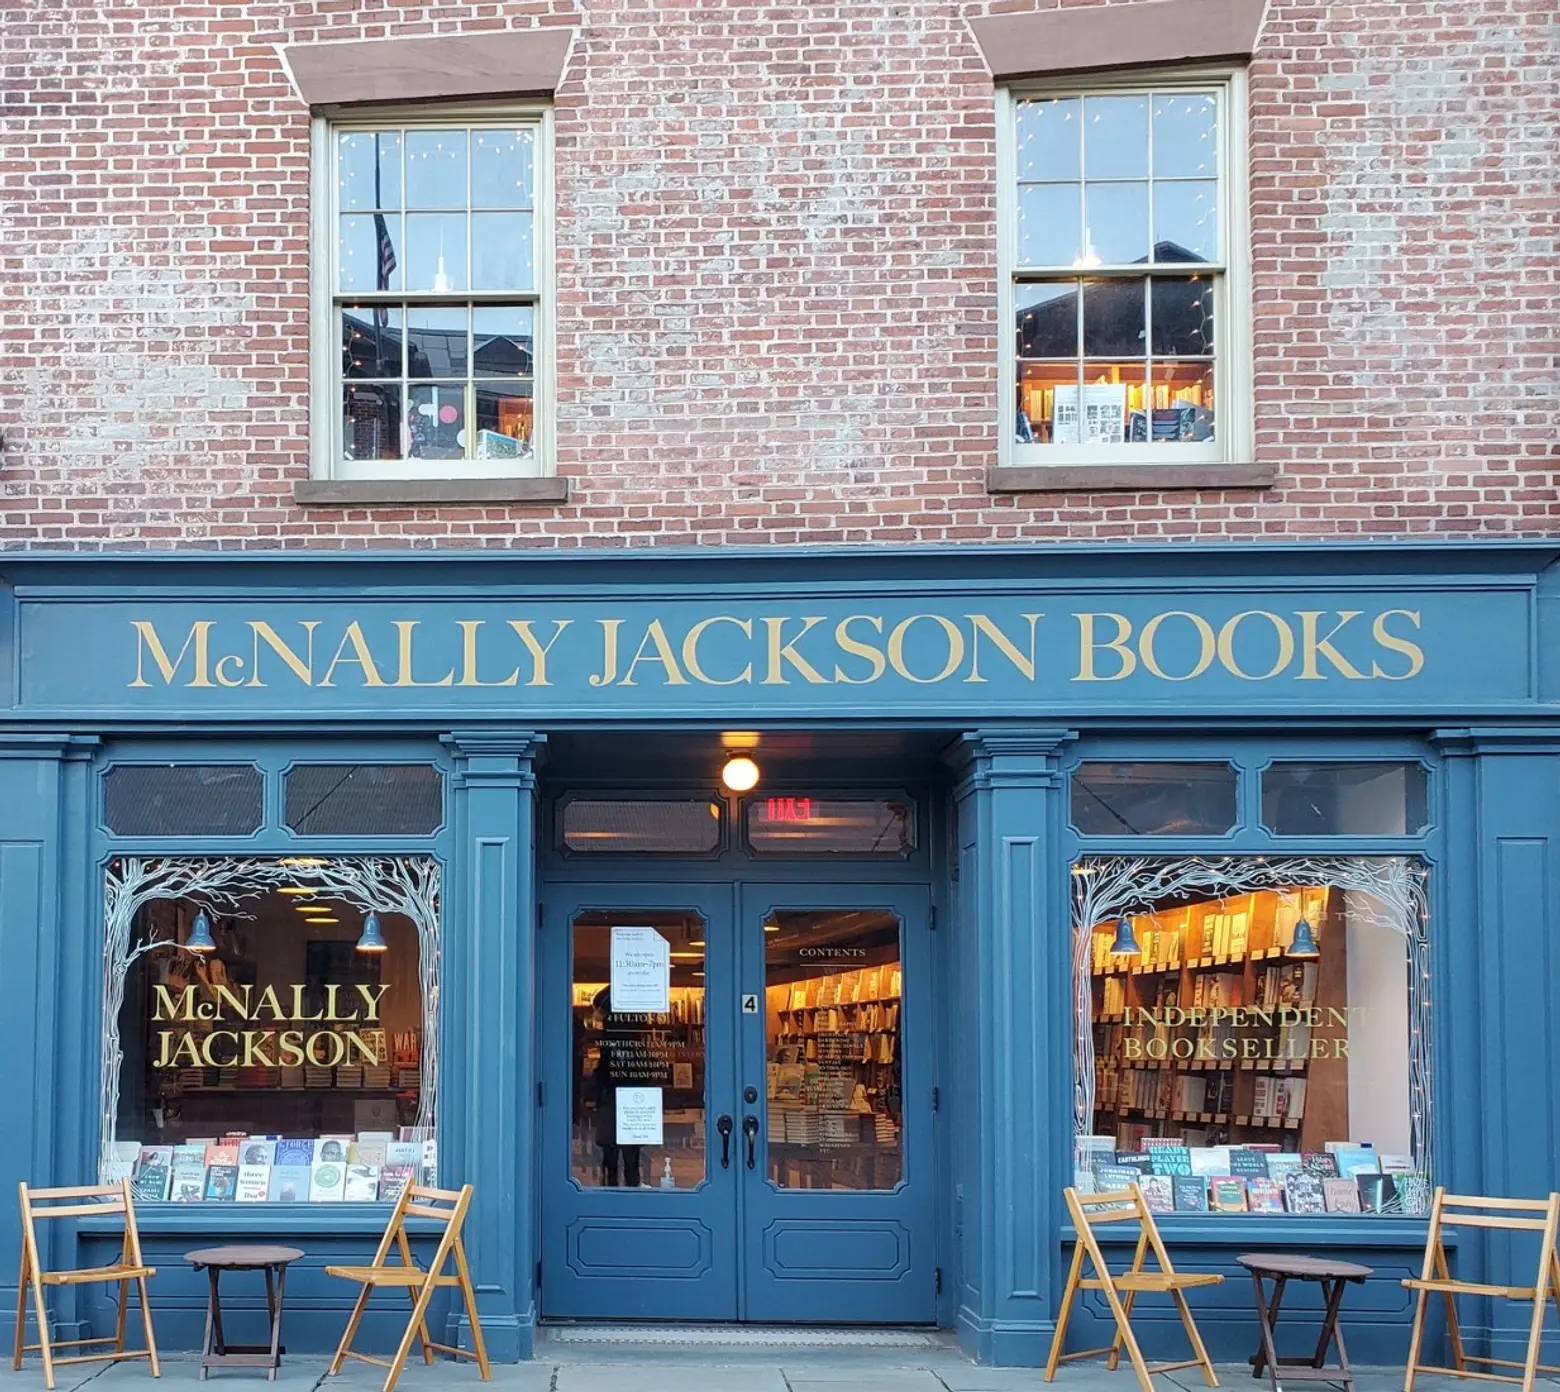 Independent bookstore McNally Jackson to open new flagship location at Rockefeller Center